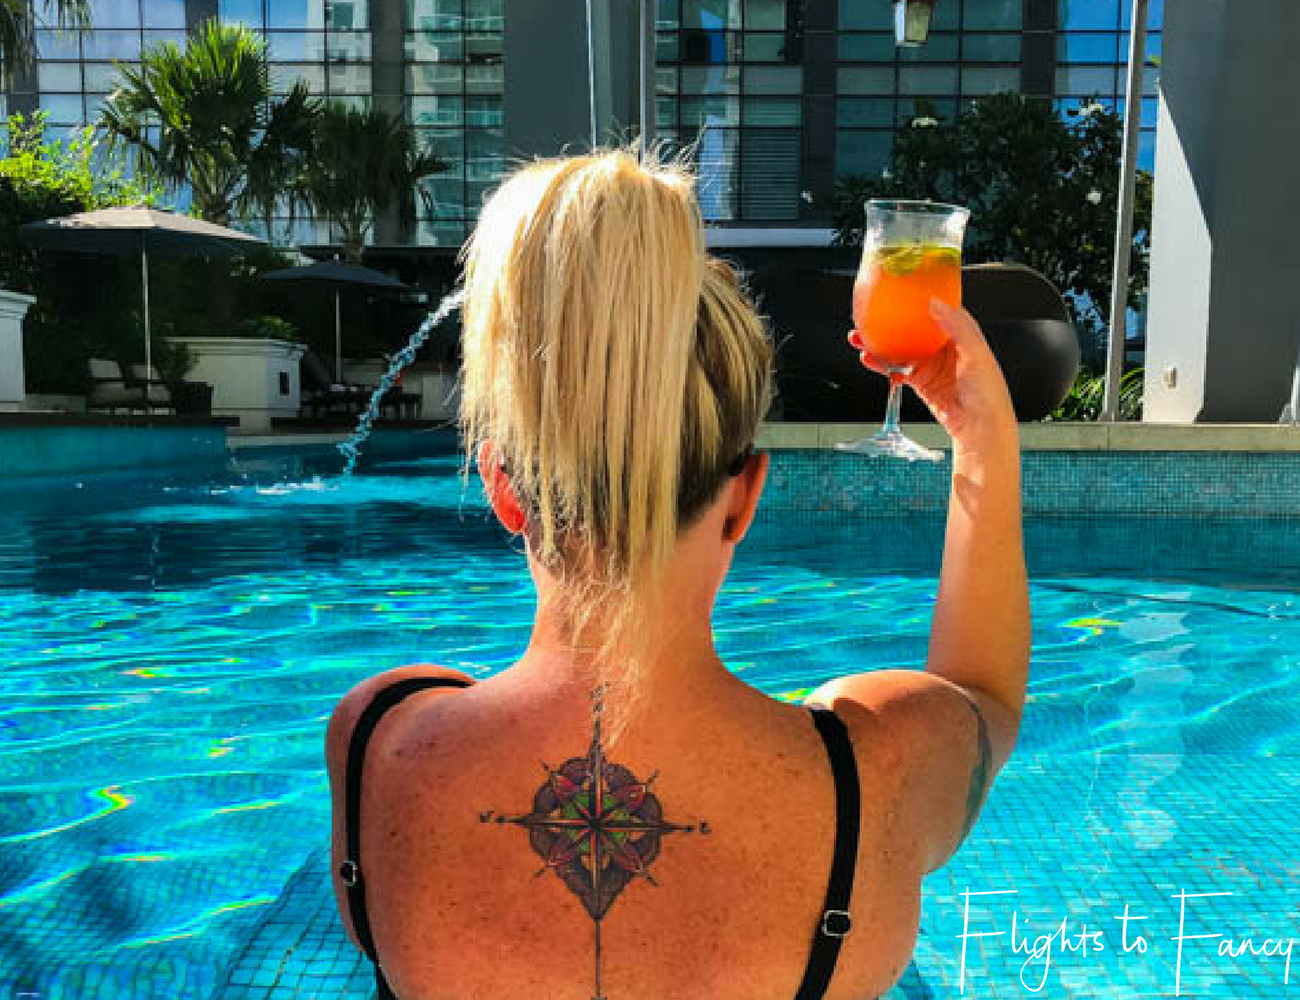 Flights To Fancy @ Raffles Makati - Afternoon cocktails by the pool are my thing. Cheers!